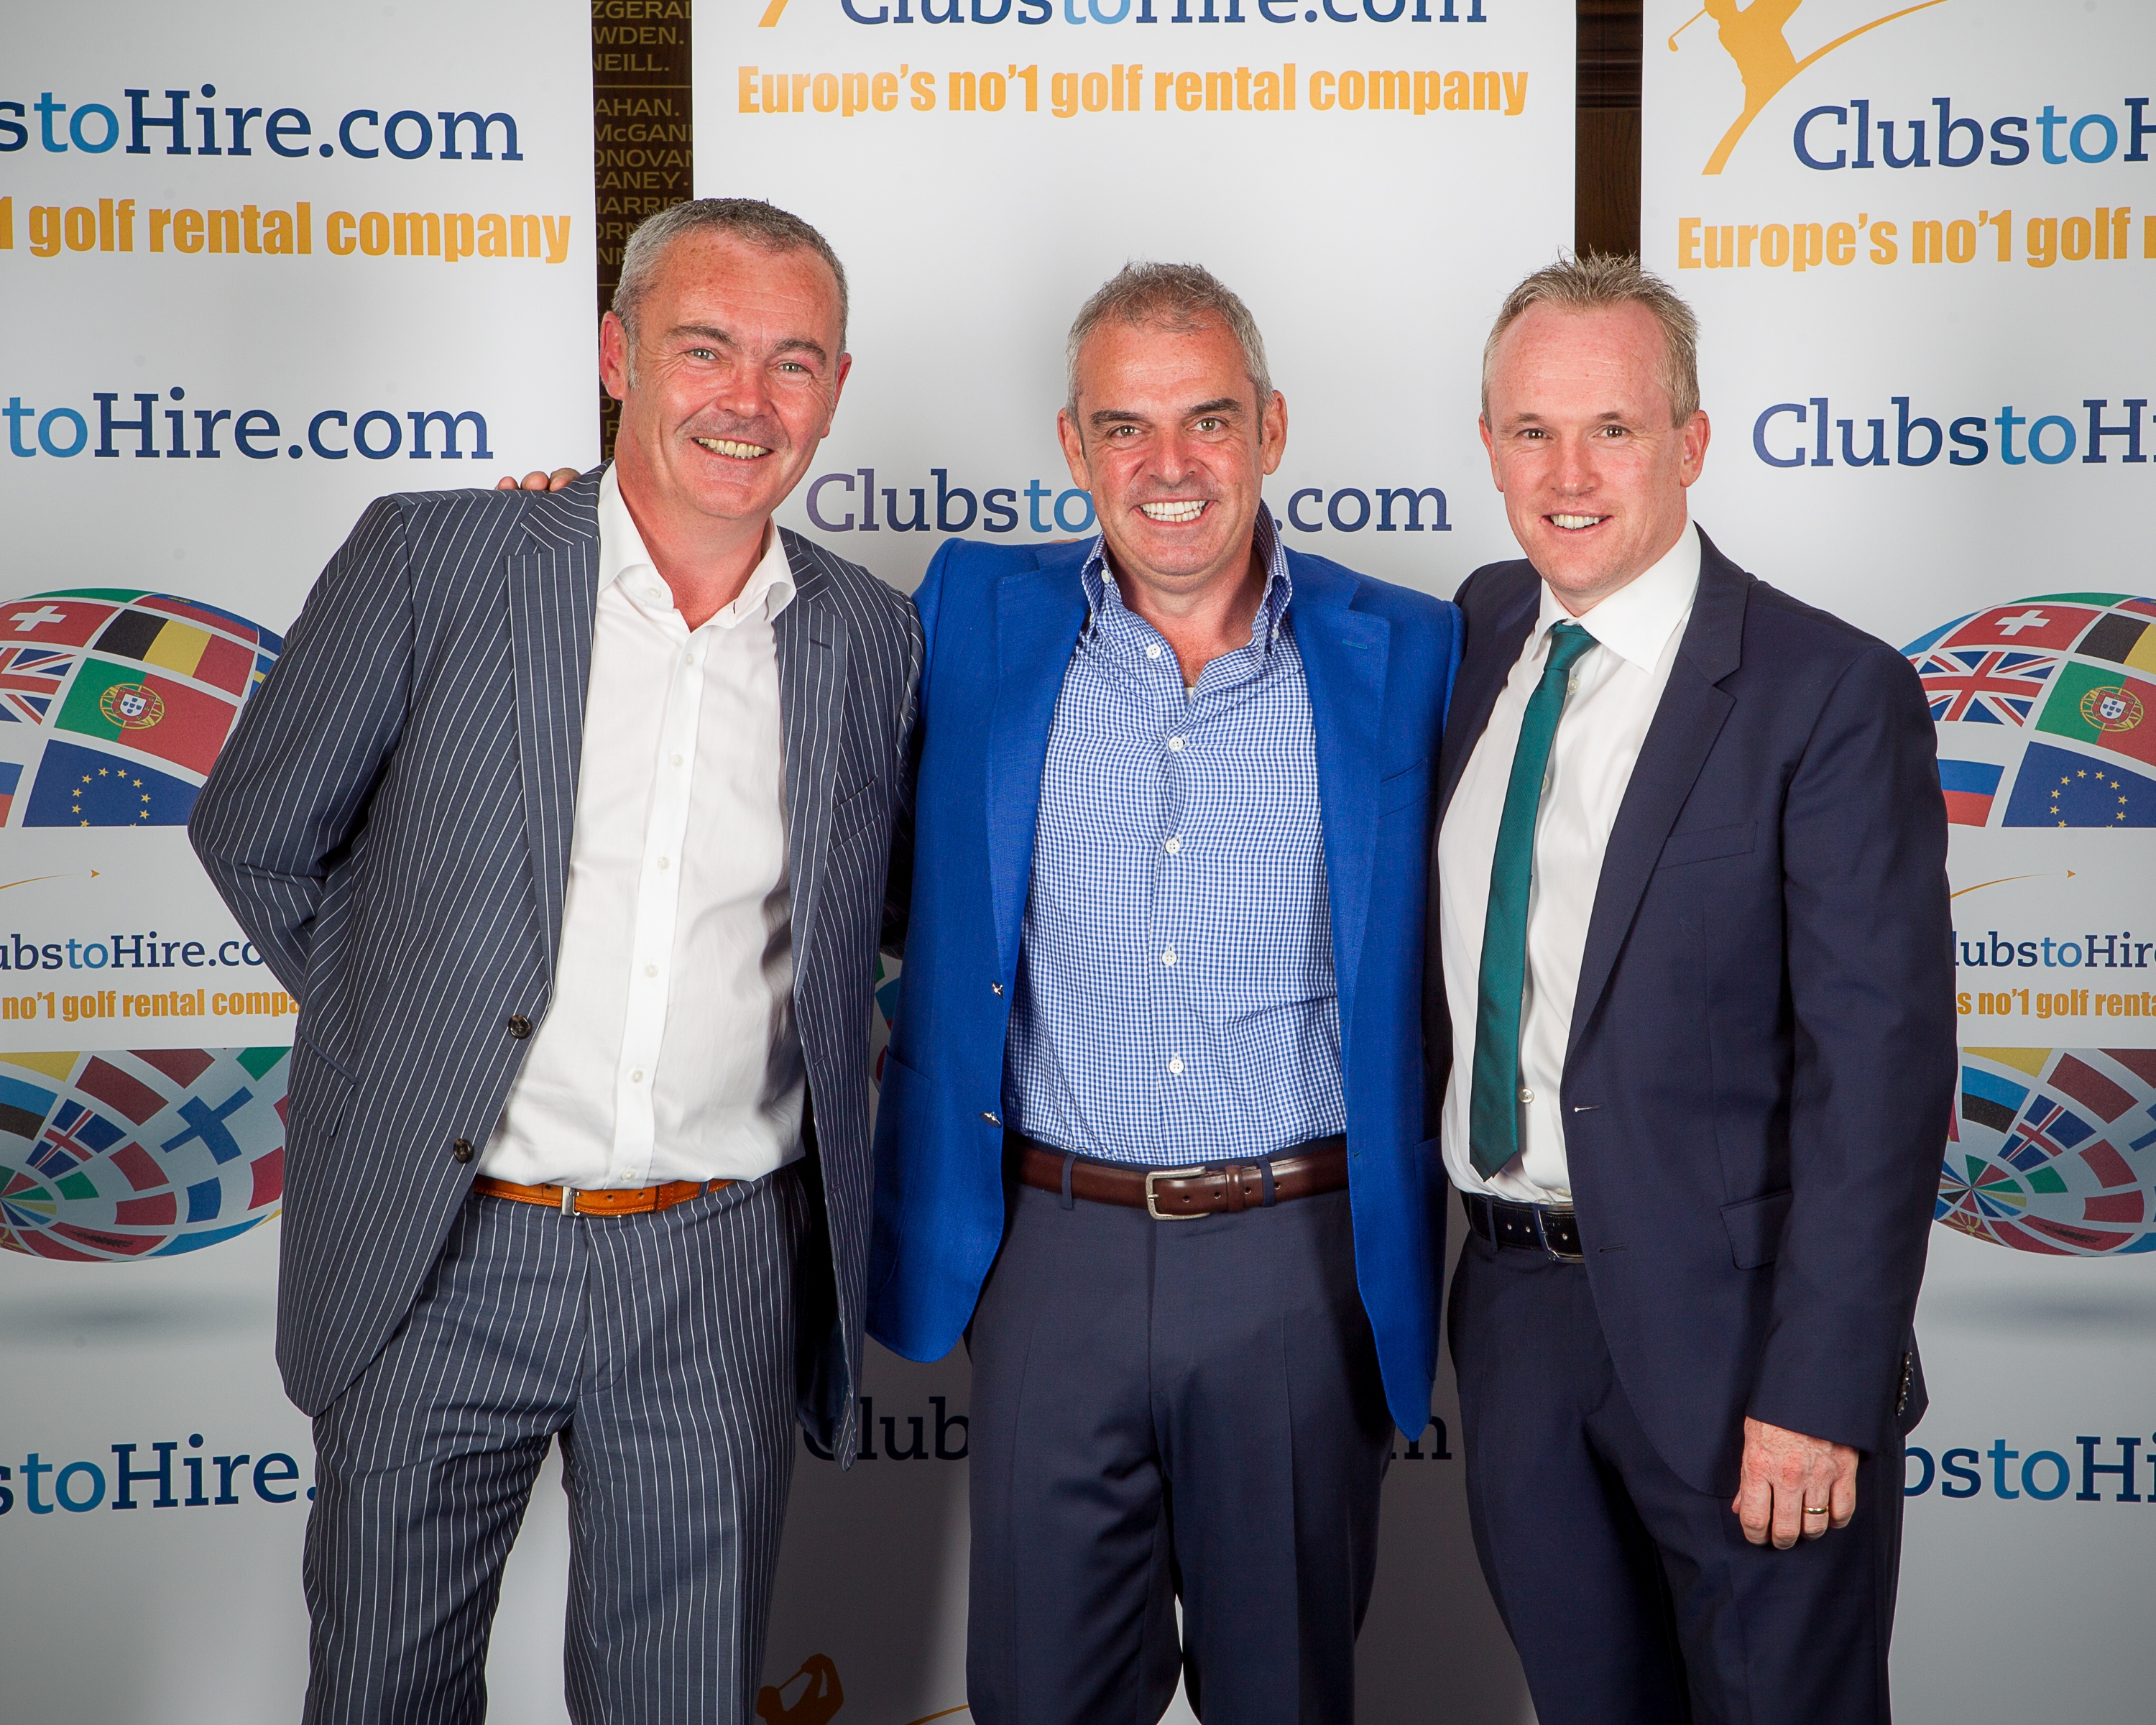 McGinley (centre) with ClubstoHire.com founders McKernan (left) and Judge 